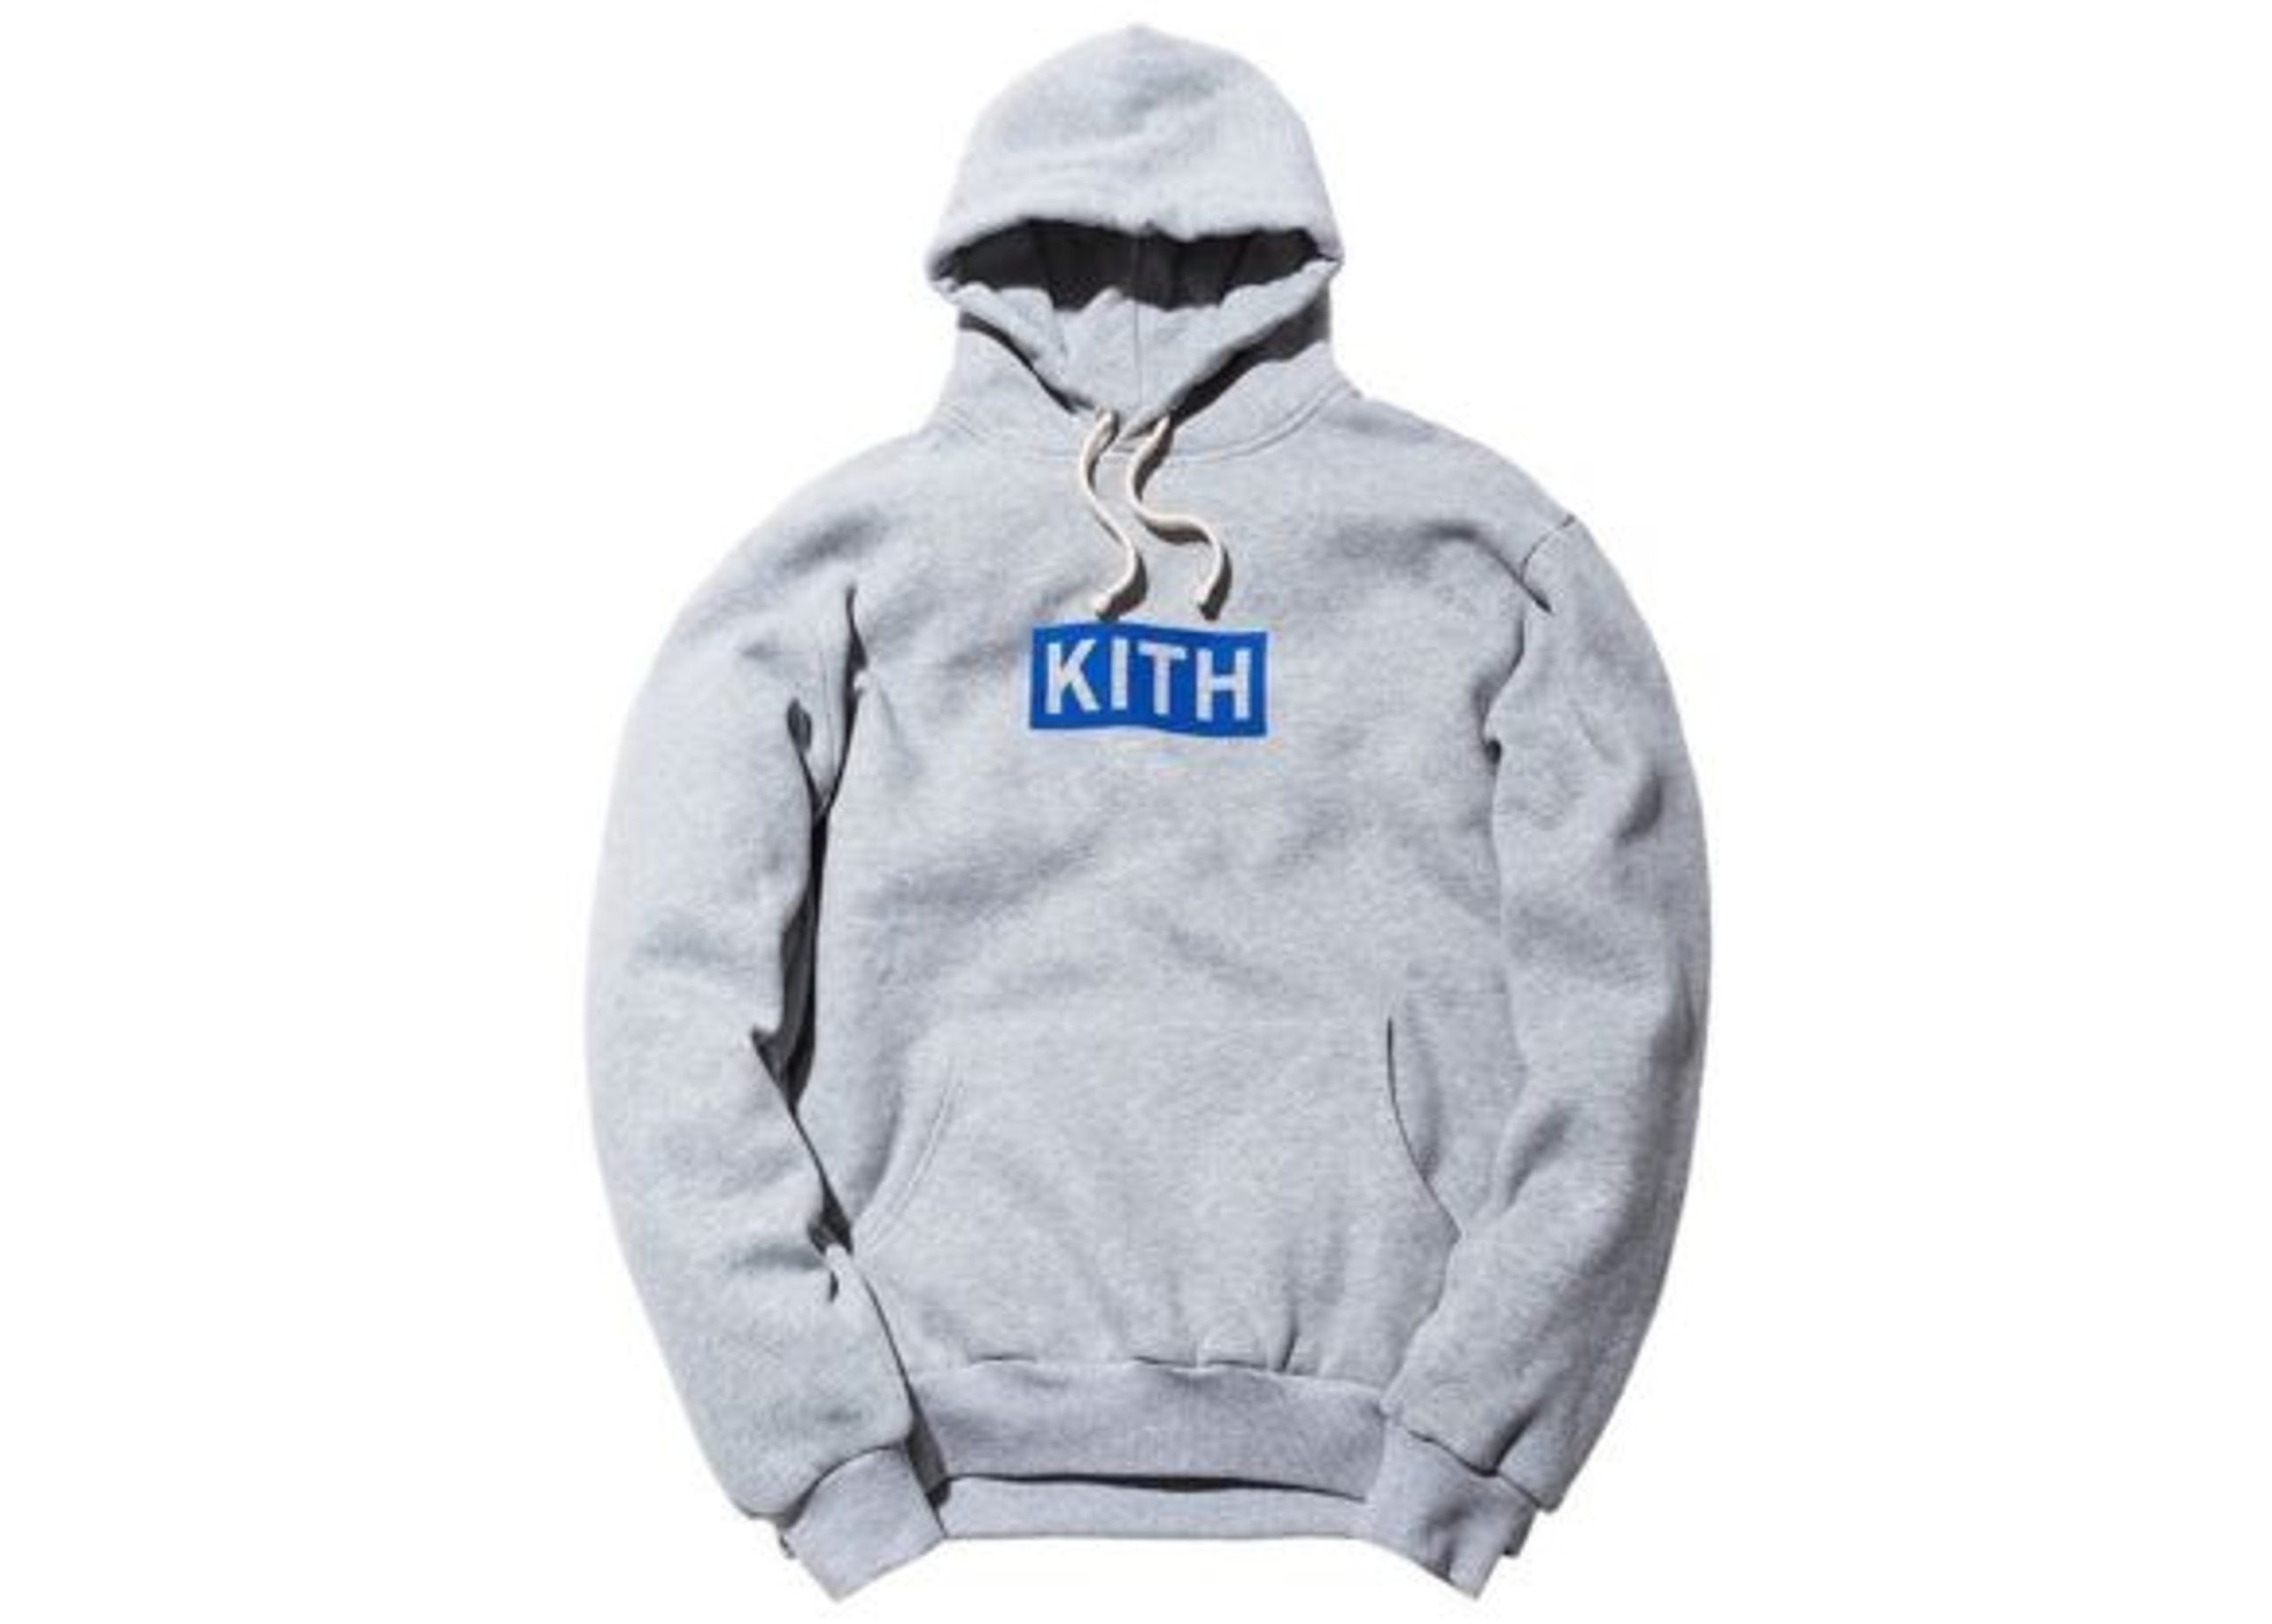 KITH X COLETTE hoodie Size S